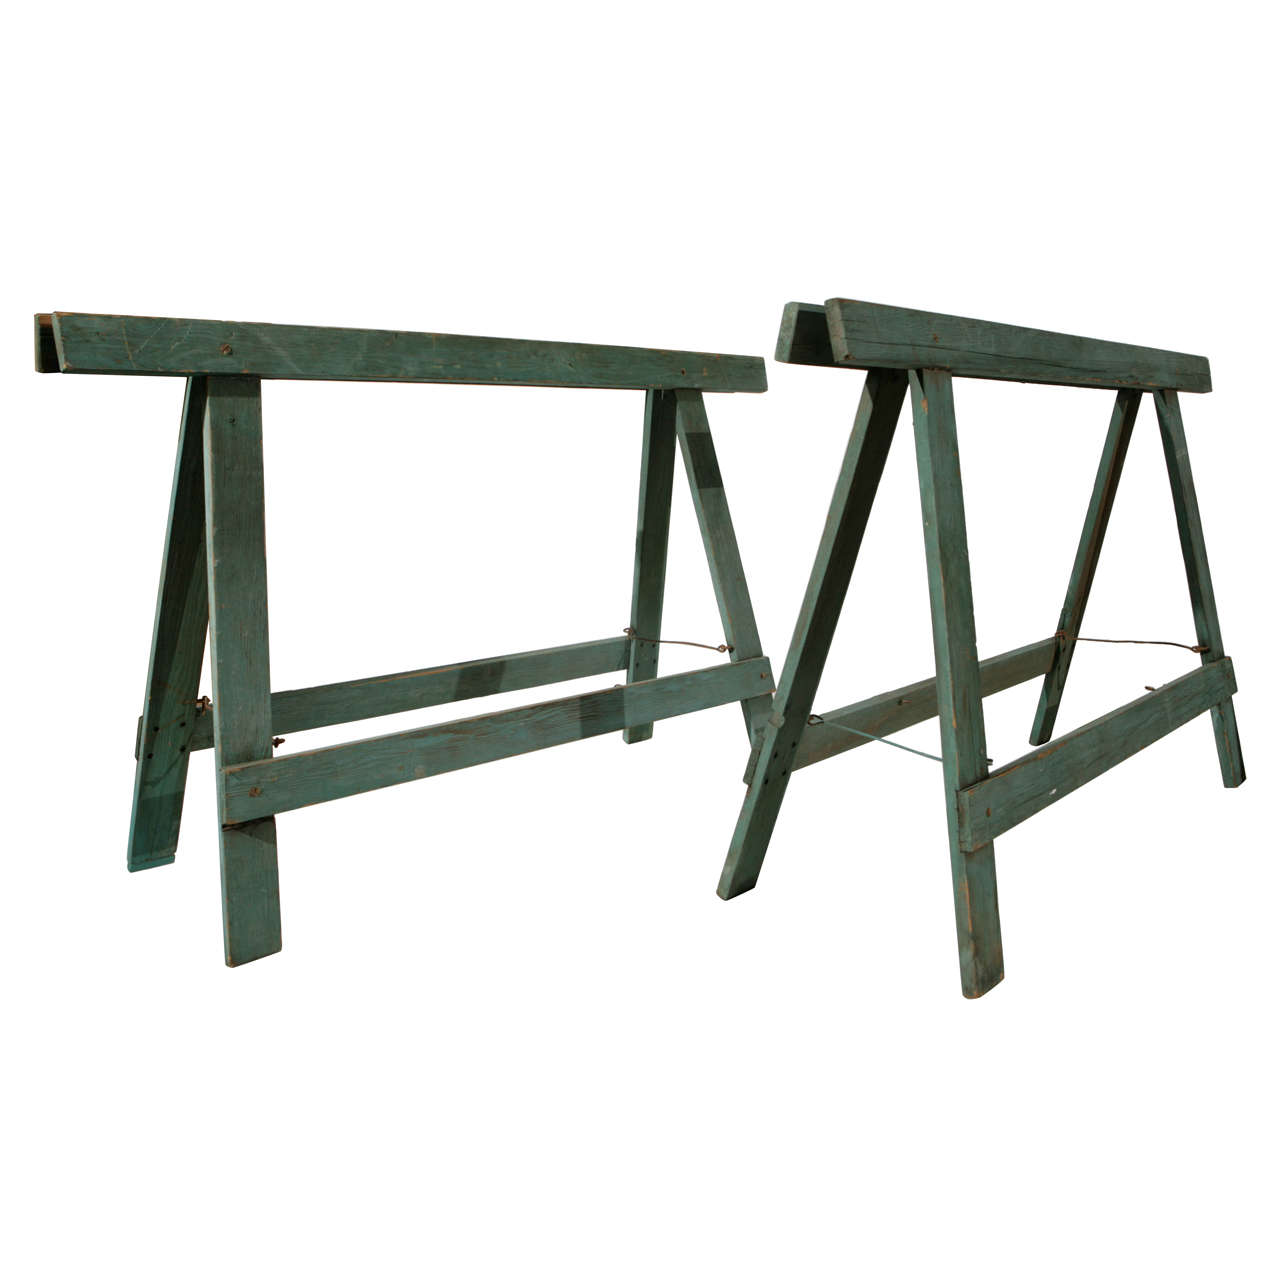 1940s Industrial Sawhorse Work Table Legs At 1stdibs